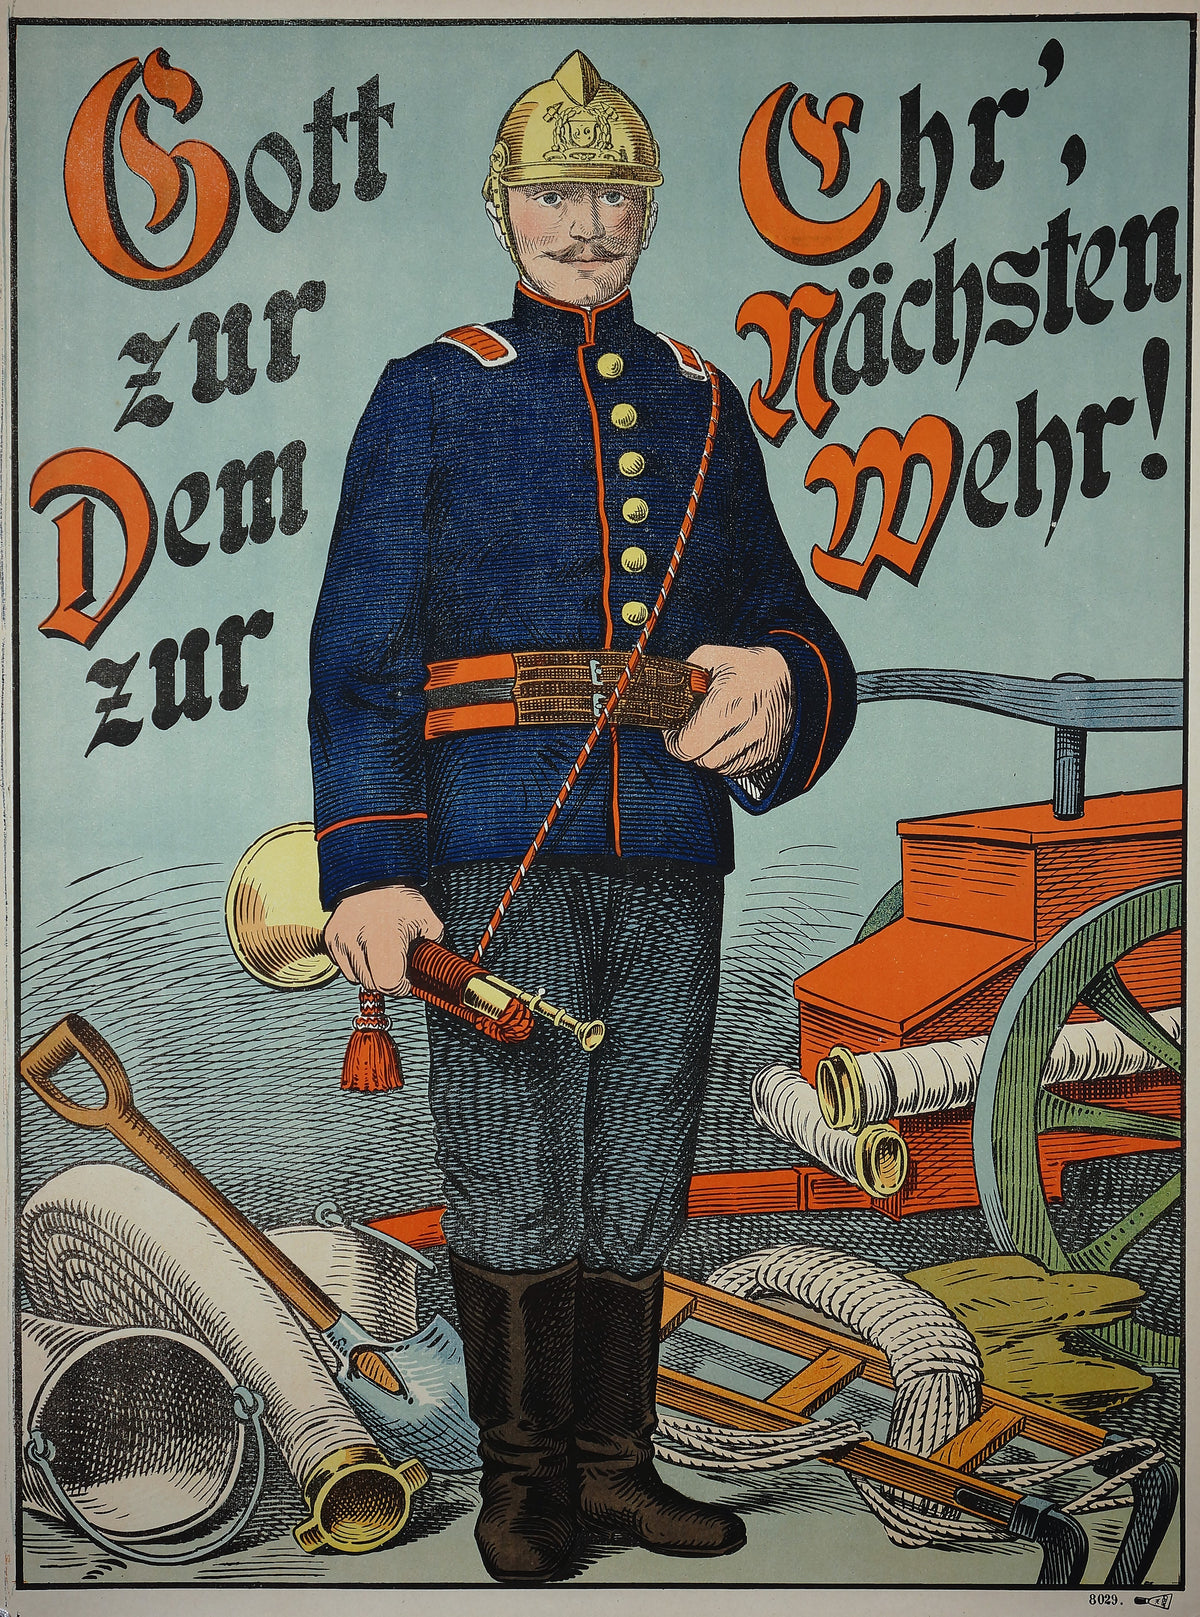 Wissembourg- Pompier (Firefighter) - Authentic Vintage Poster